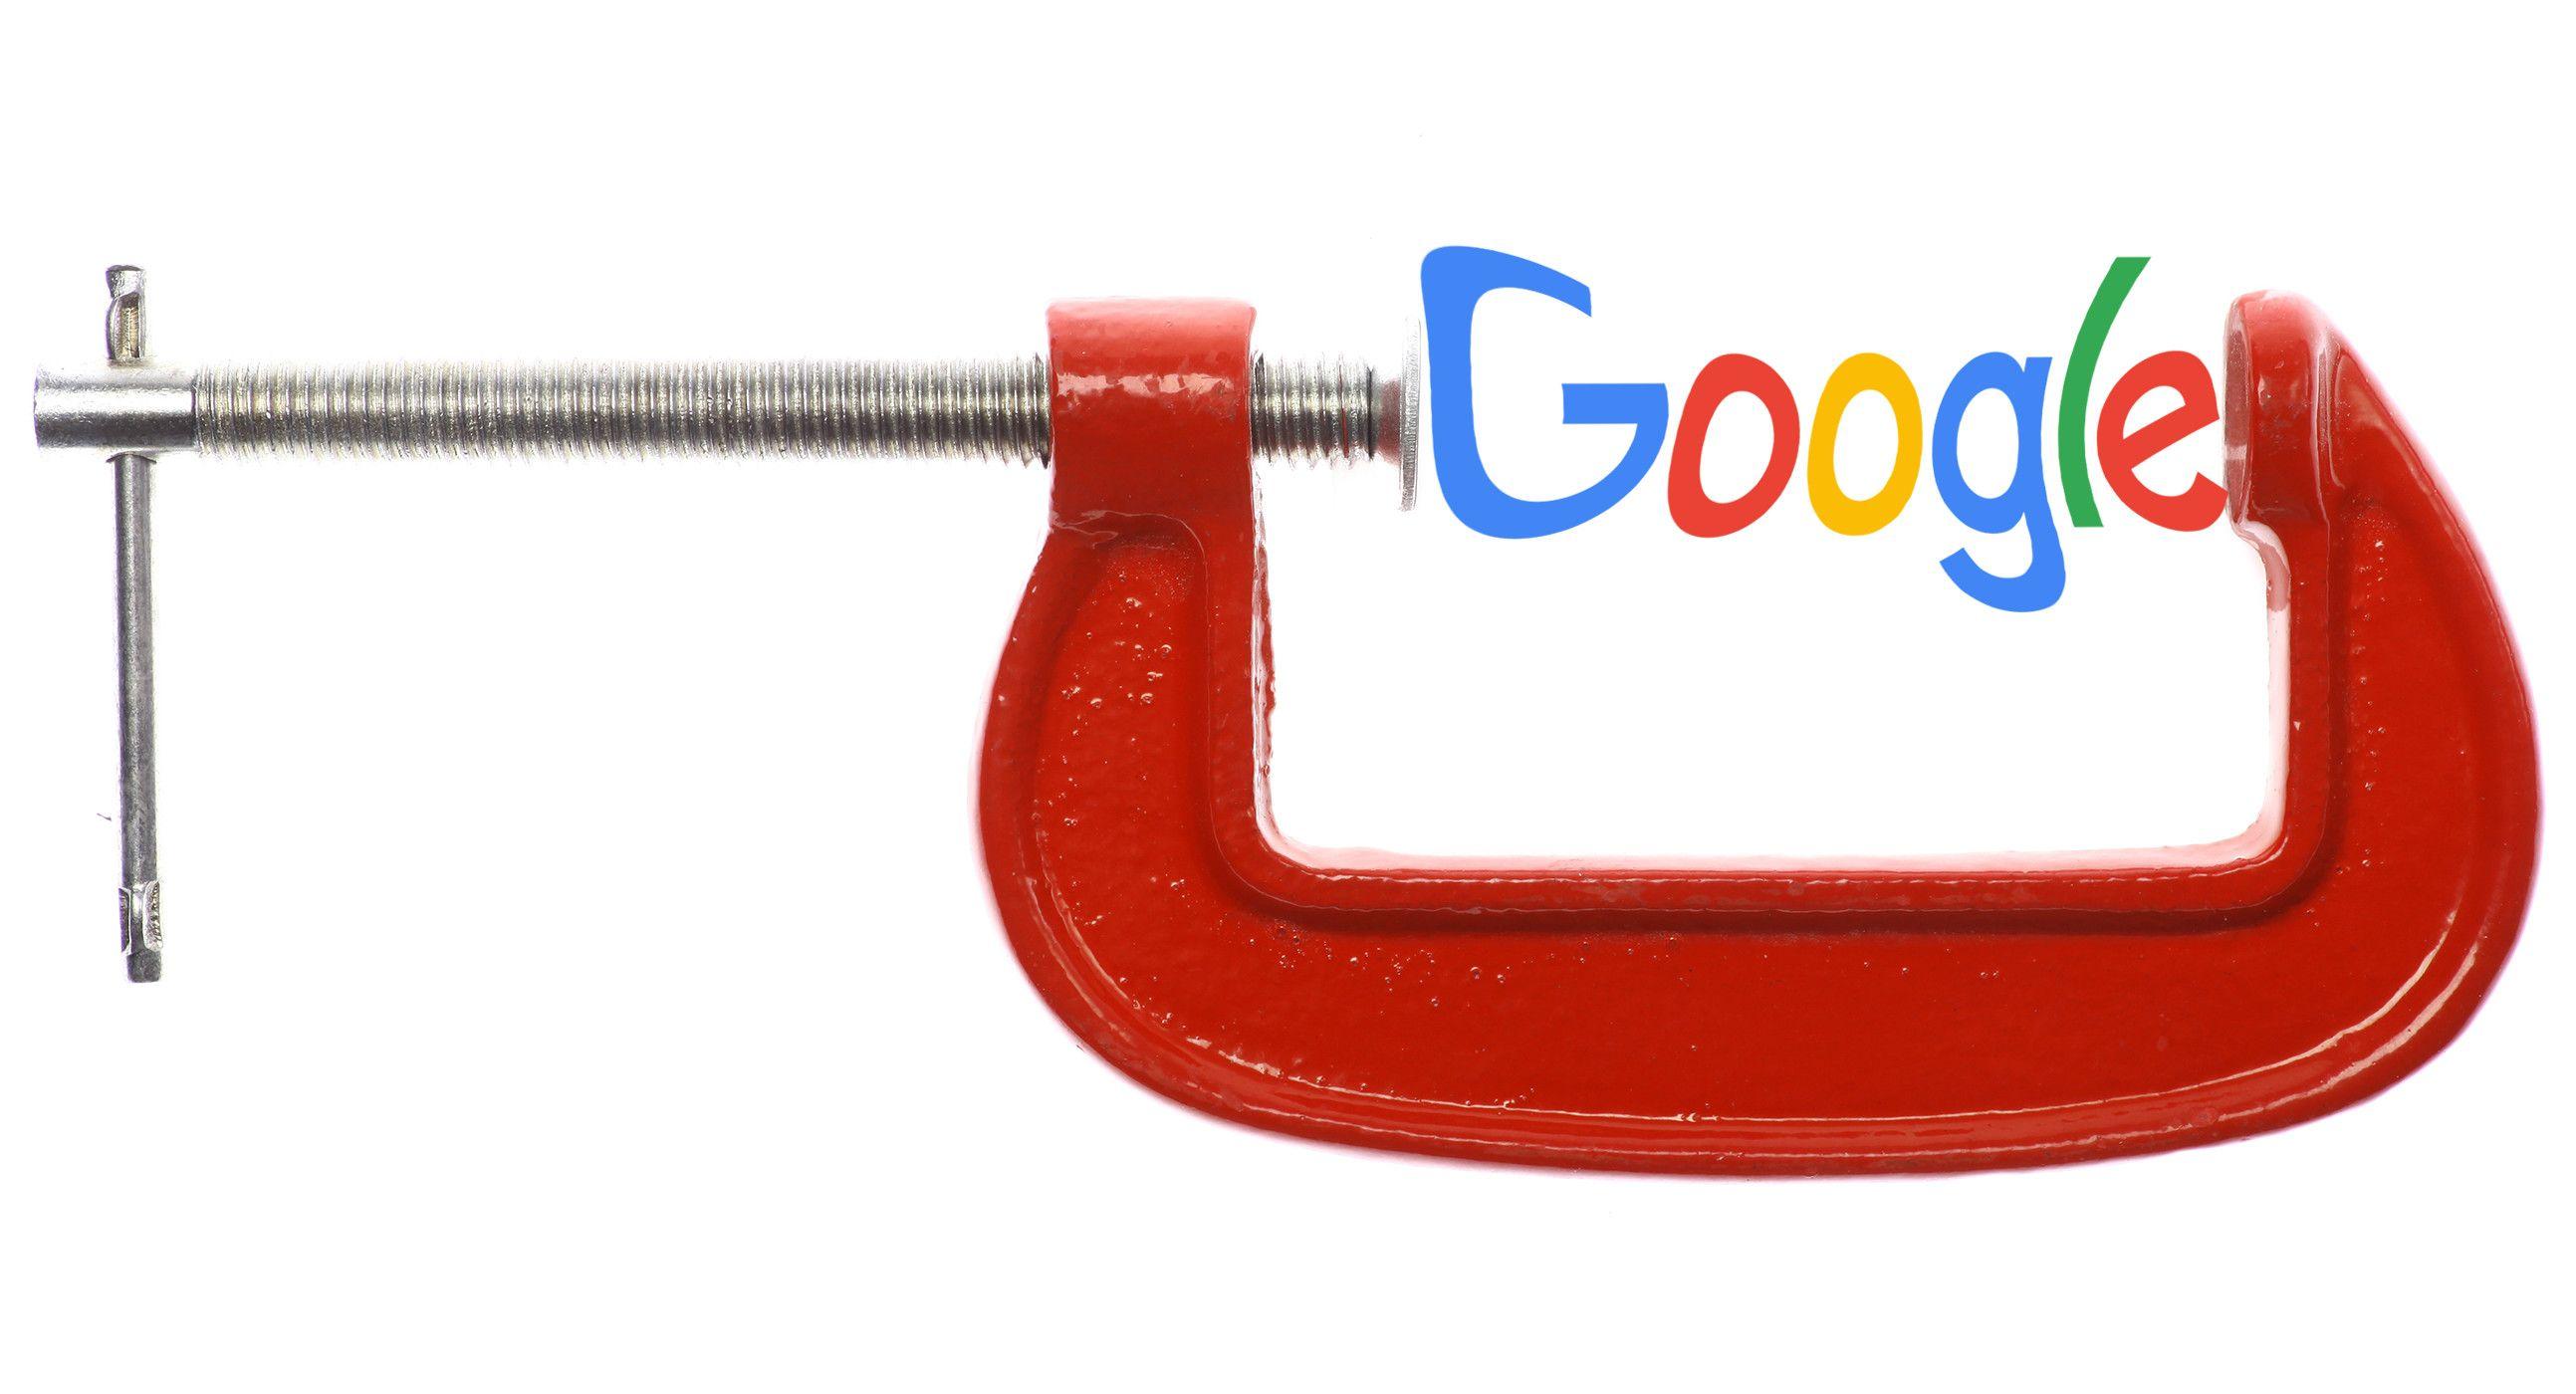 Not Google Logo - Google's new PNG logo might not be as small as claimed